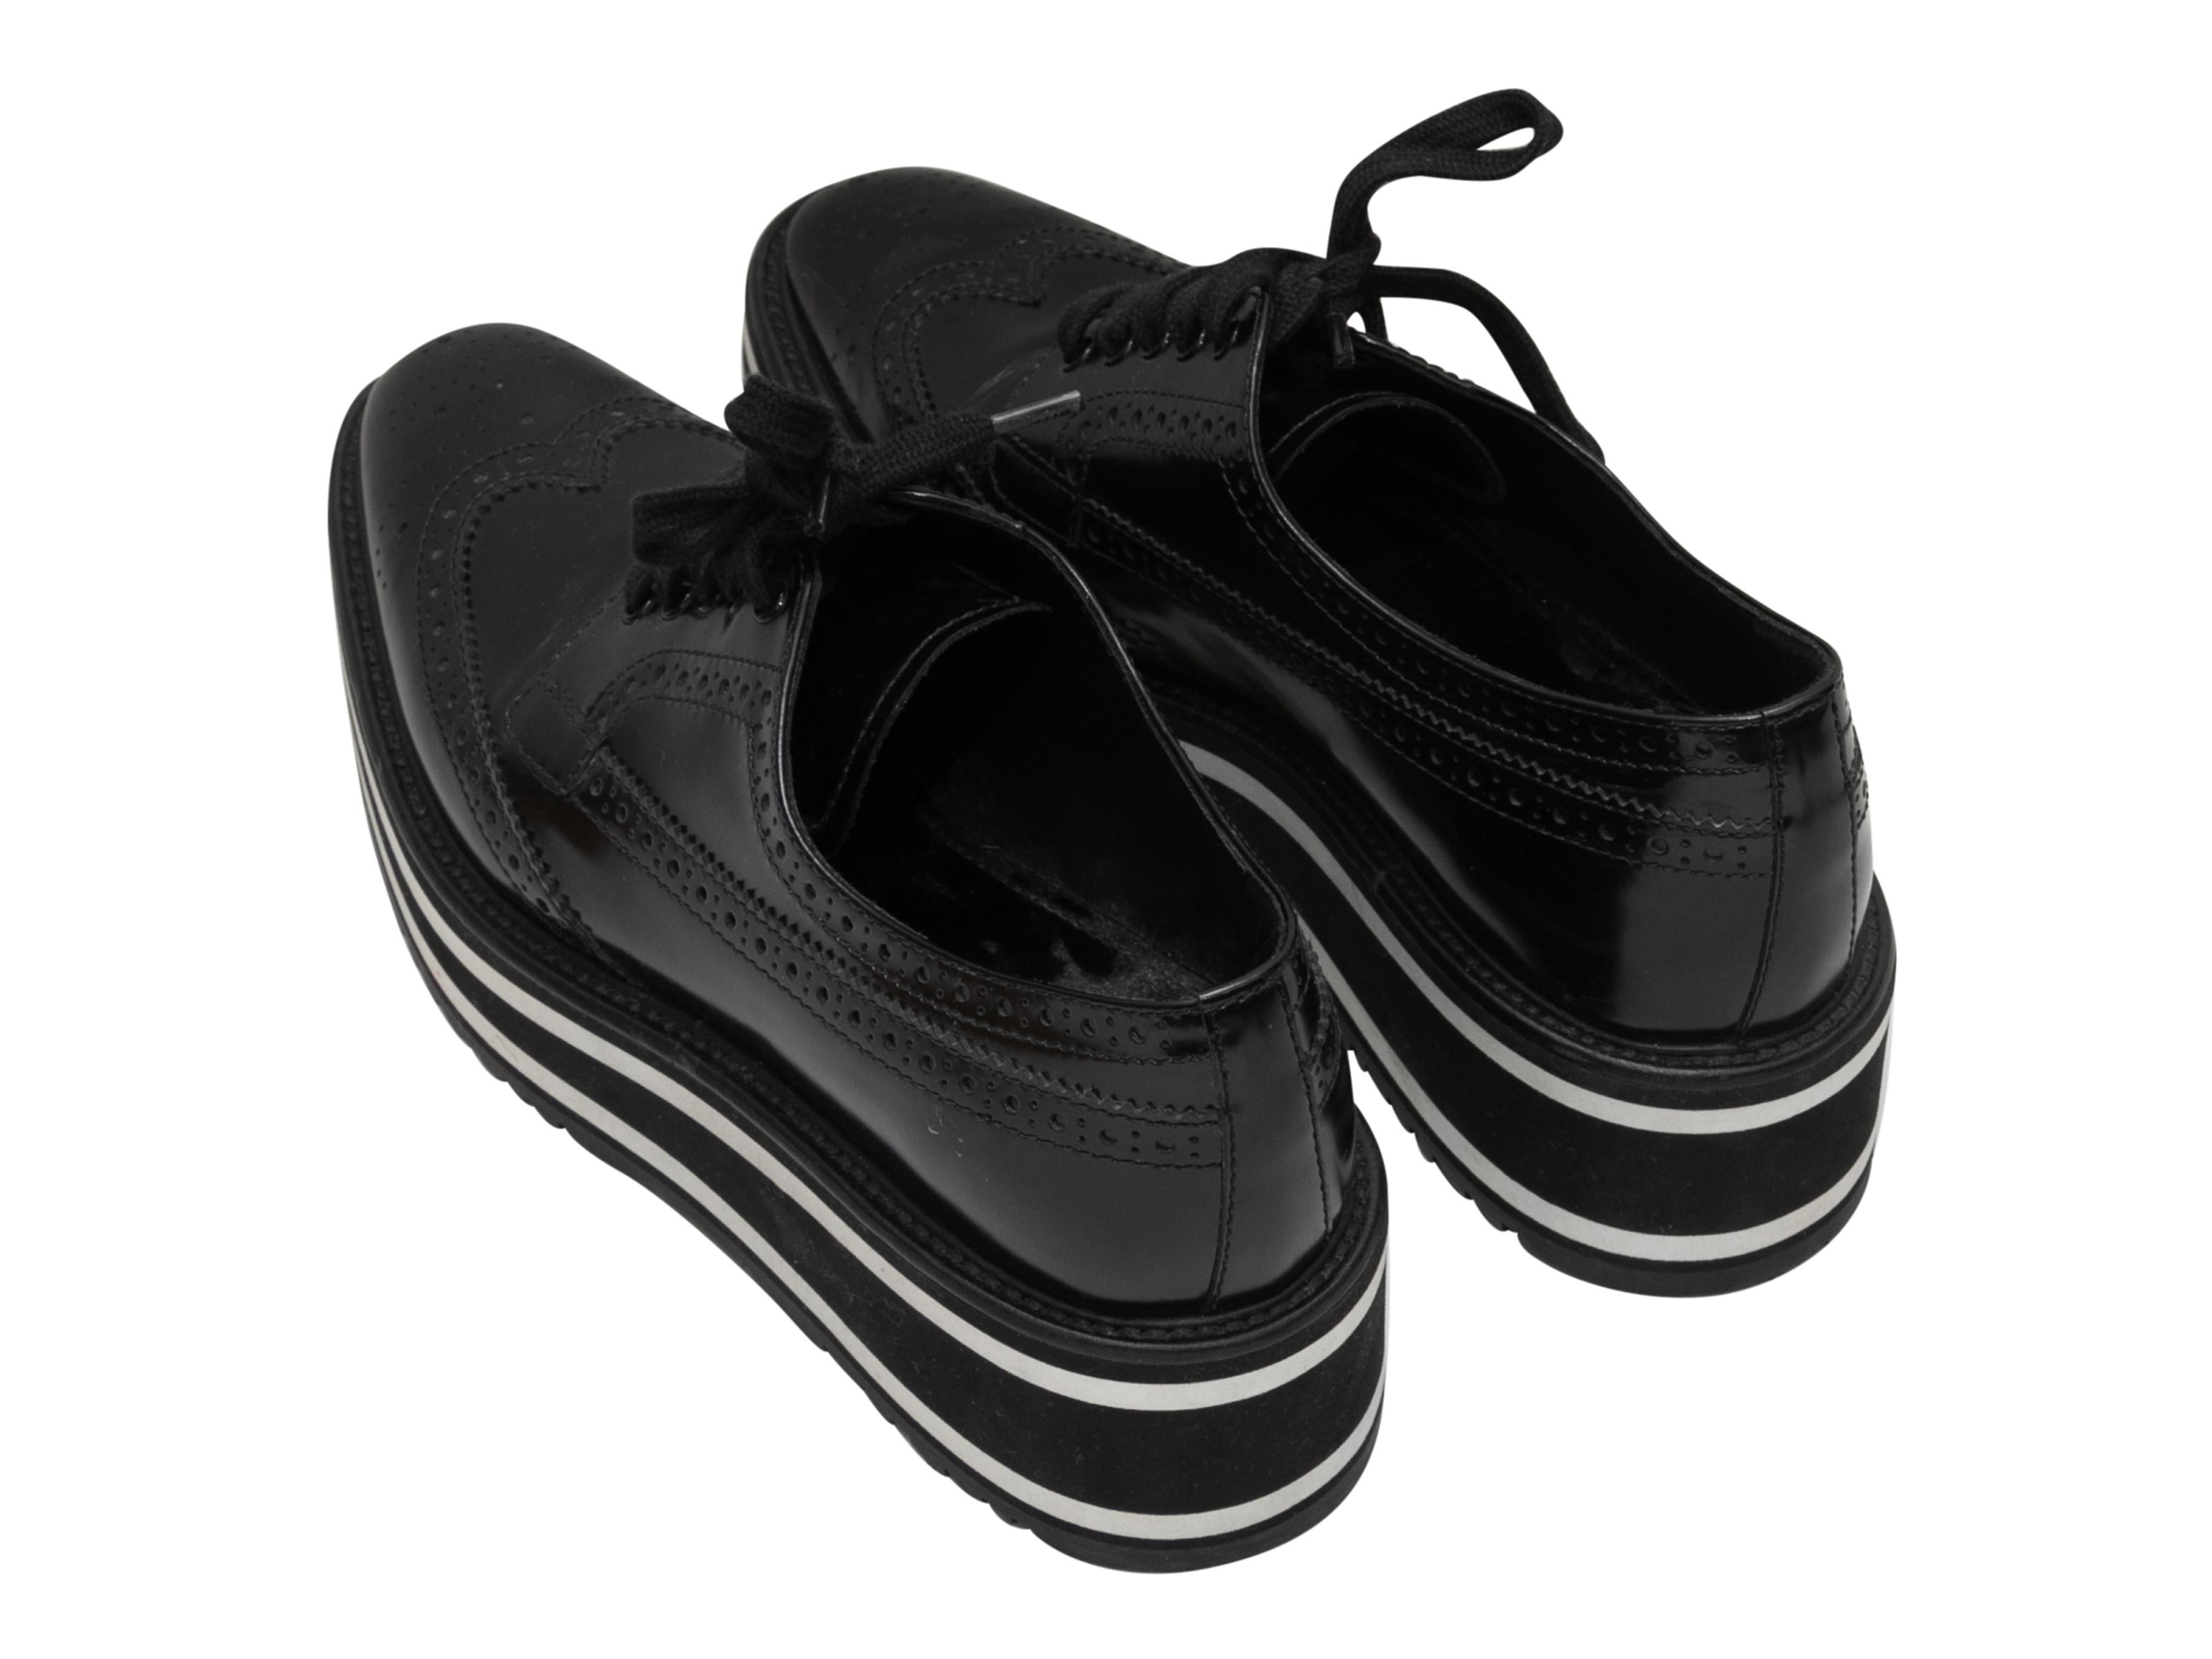 Black & White Prada Platform Brogues Size 38 In Good Condition For Sale In New York, NY